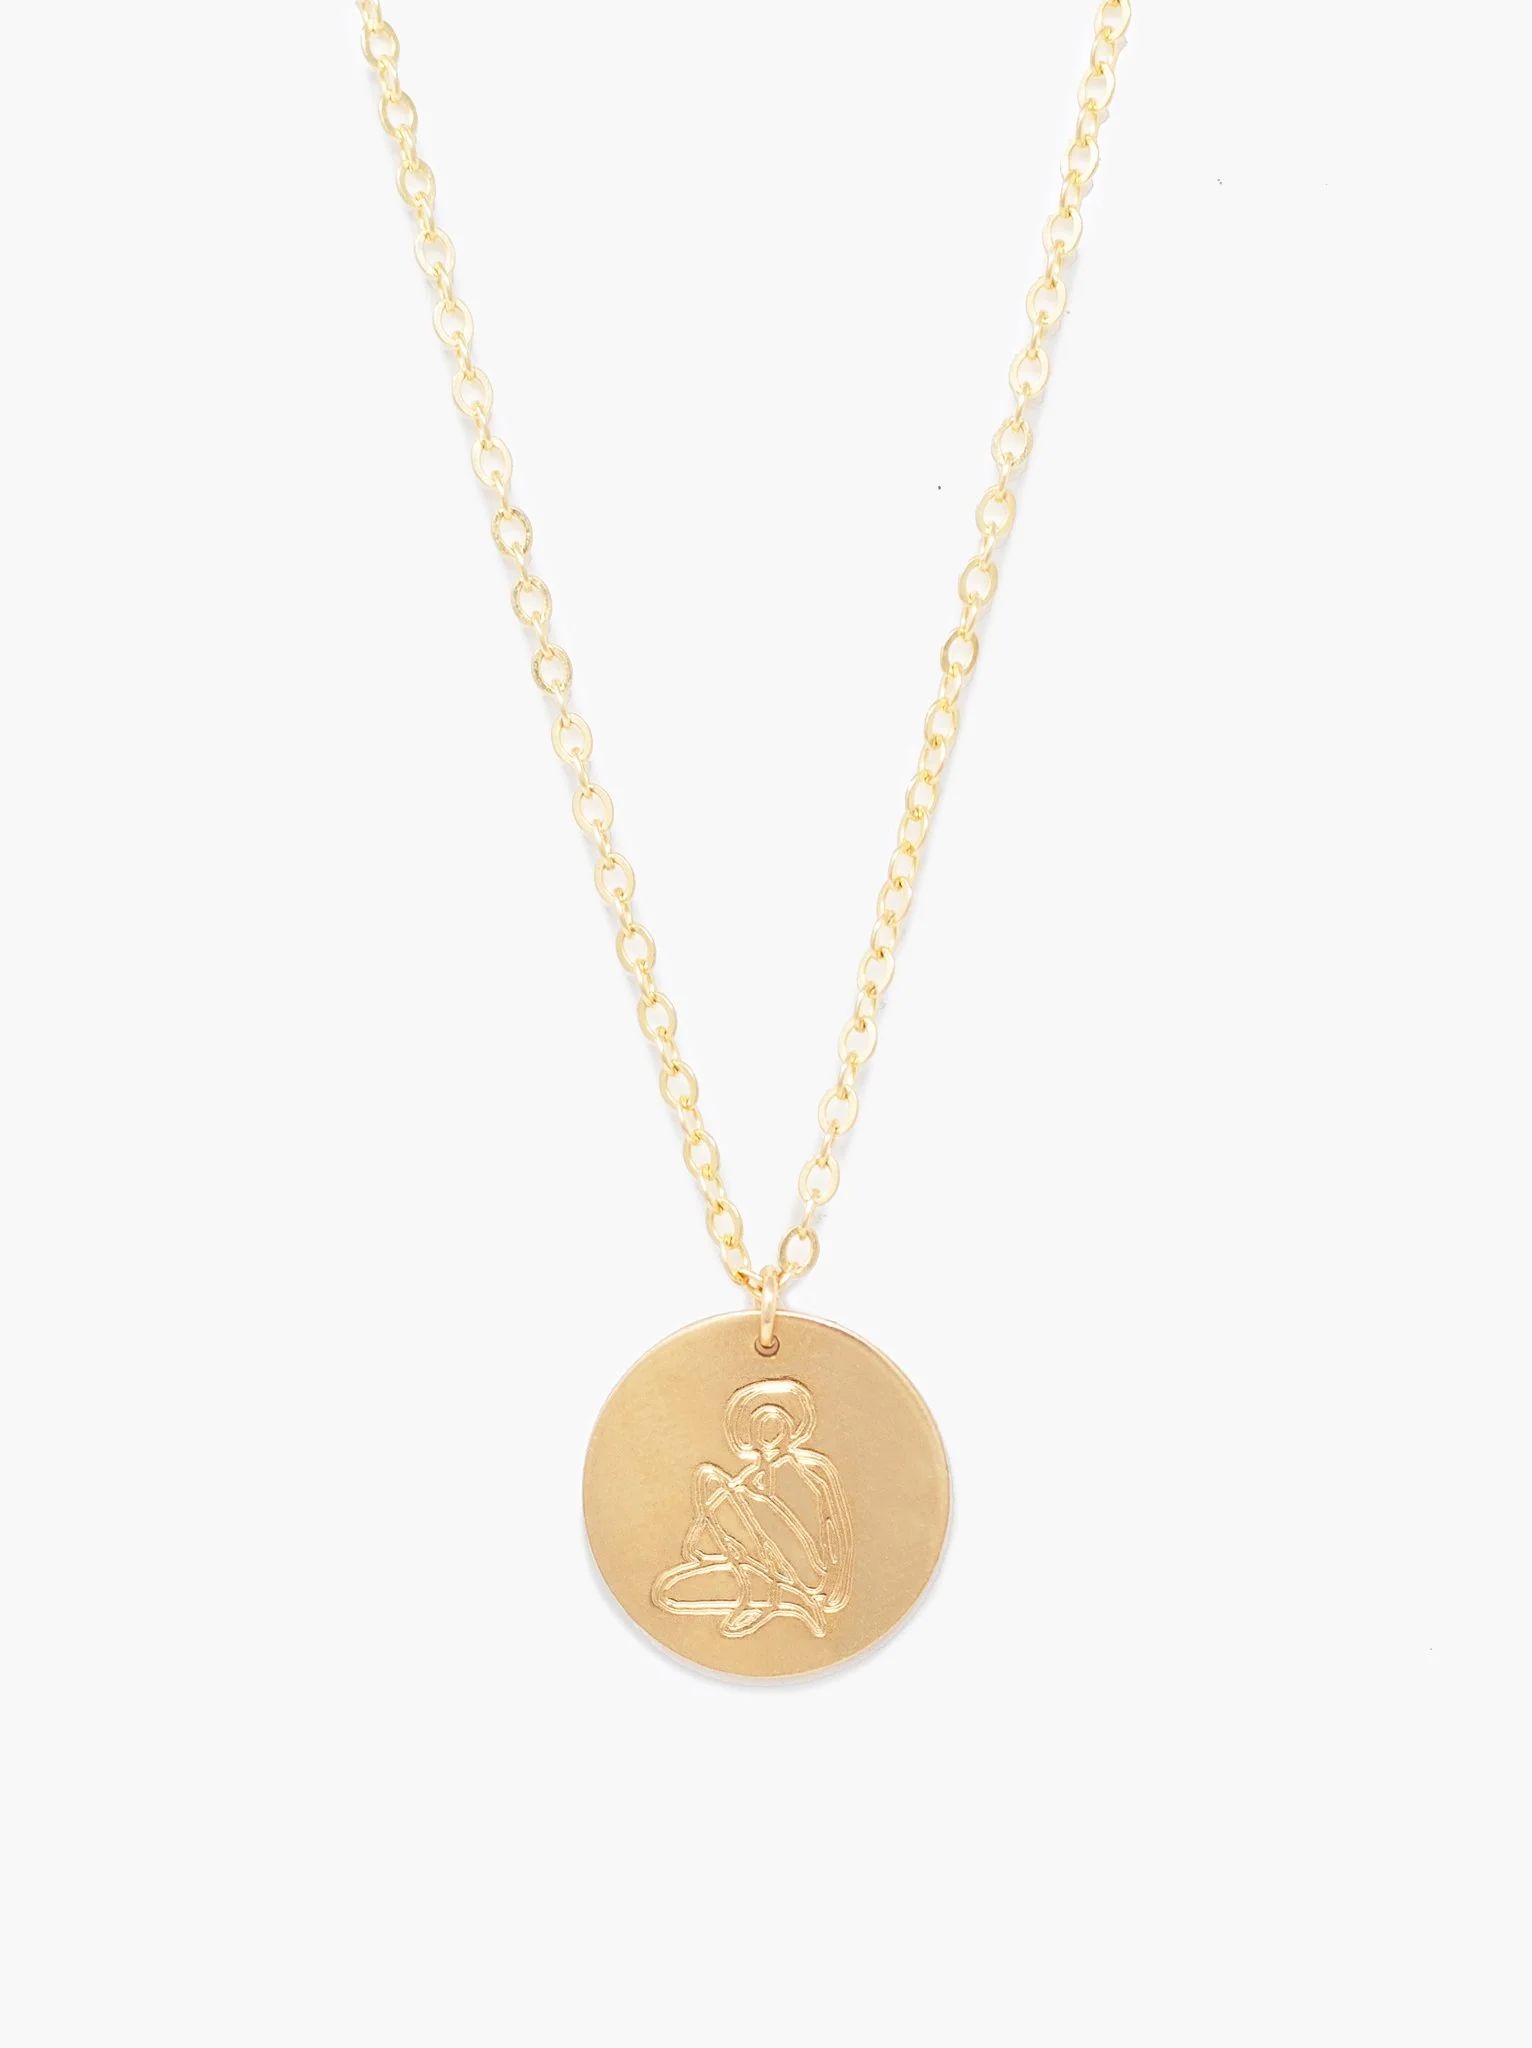 She's Worth More Empower Portrait Heirloom Necklace | ABLE